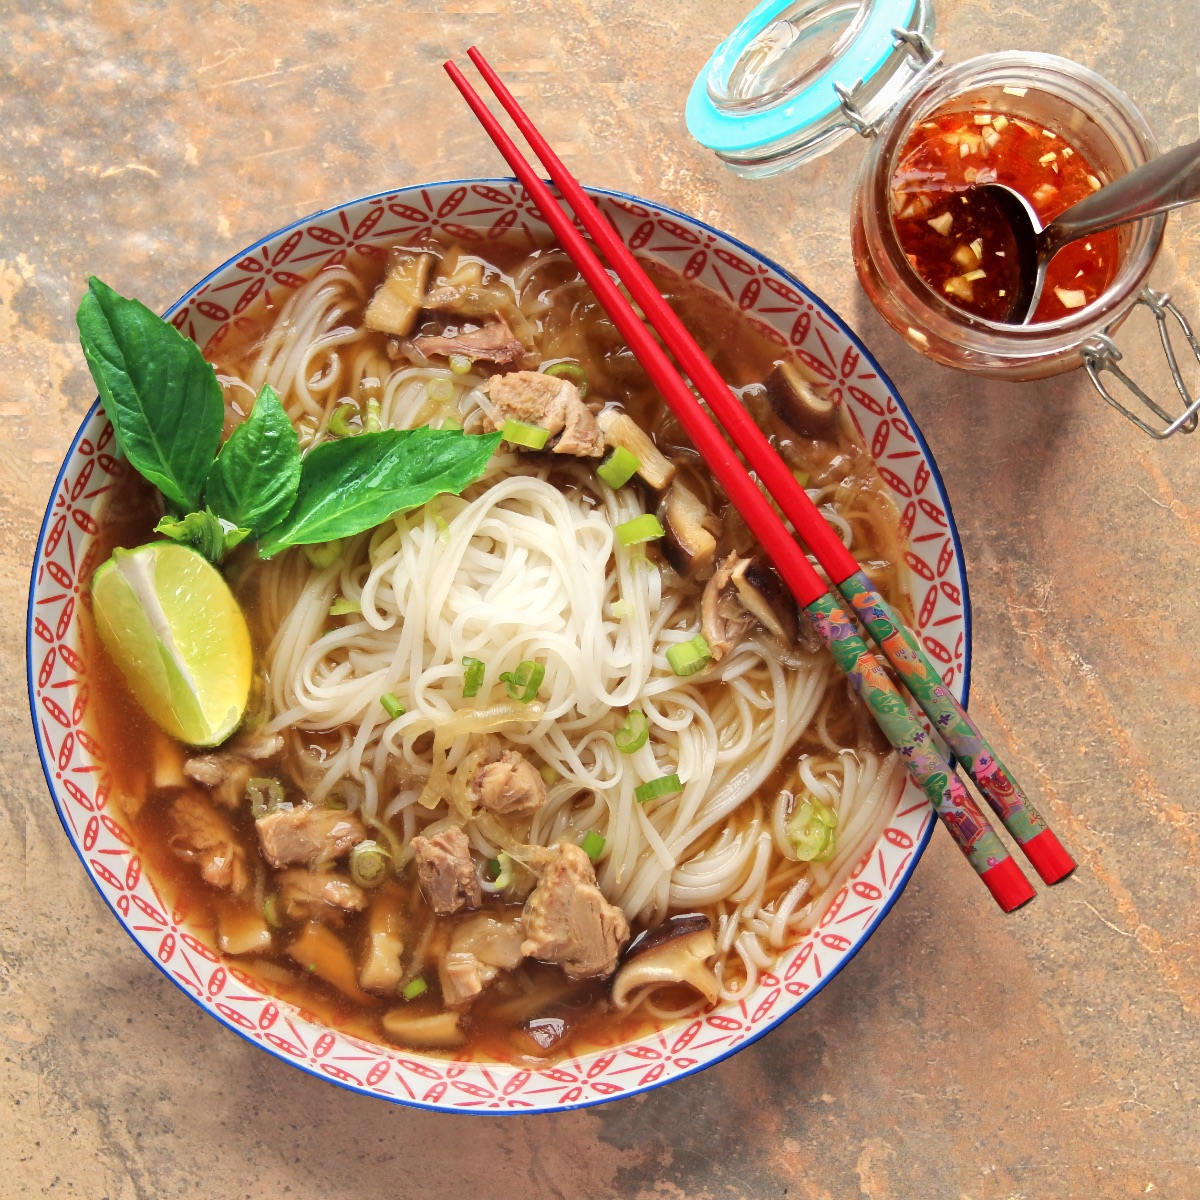 A serving of duck pho in a decorative red and white bowl with a set of red chopsticks laying on top. The pho has been garnished with a sprig of Thai basil and a lime wedge. A jar of nuoc cham sits nearby.